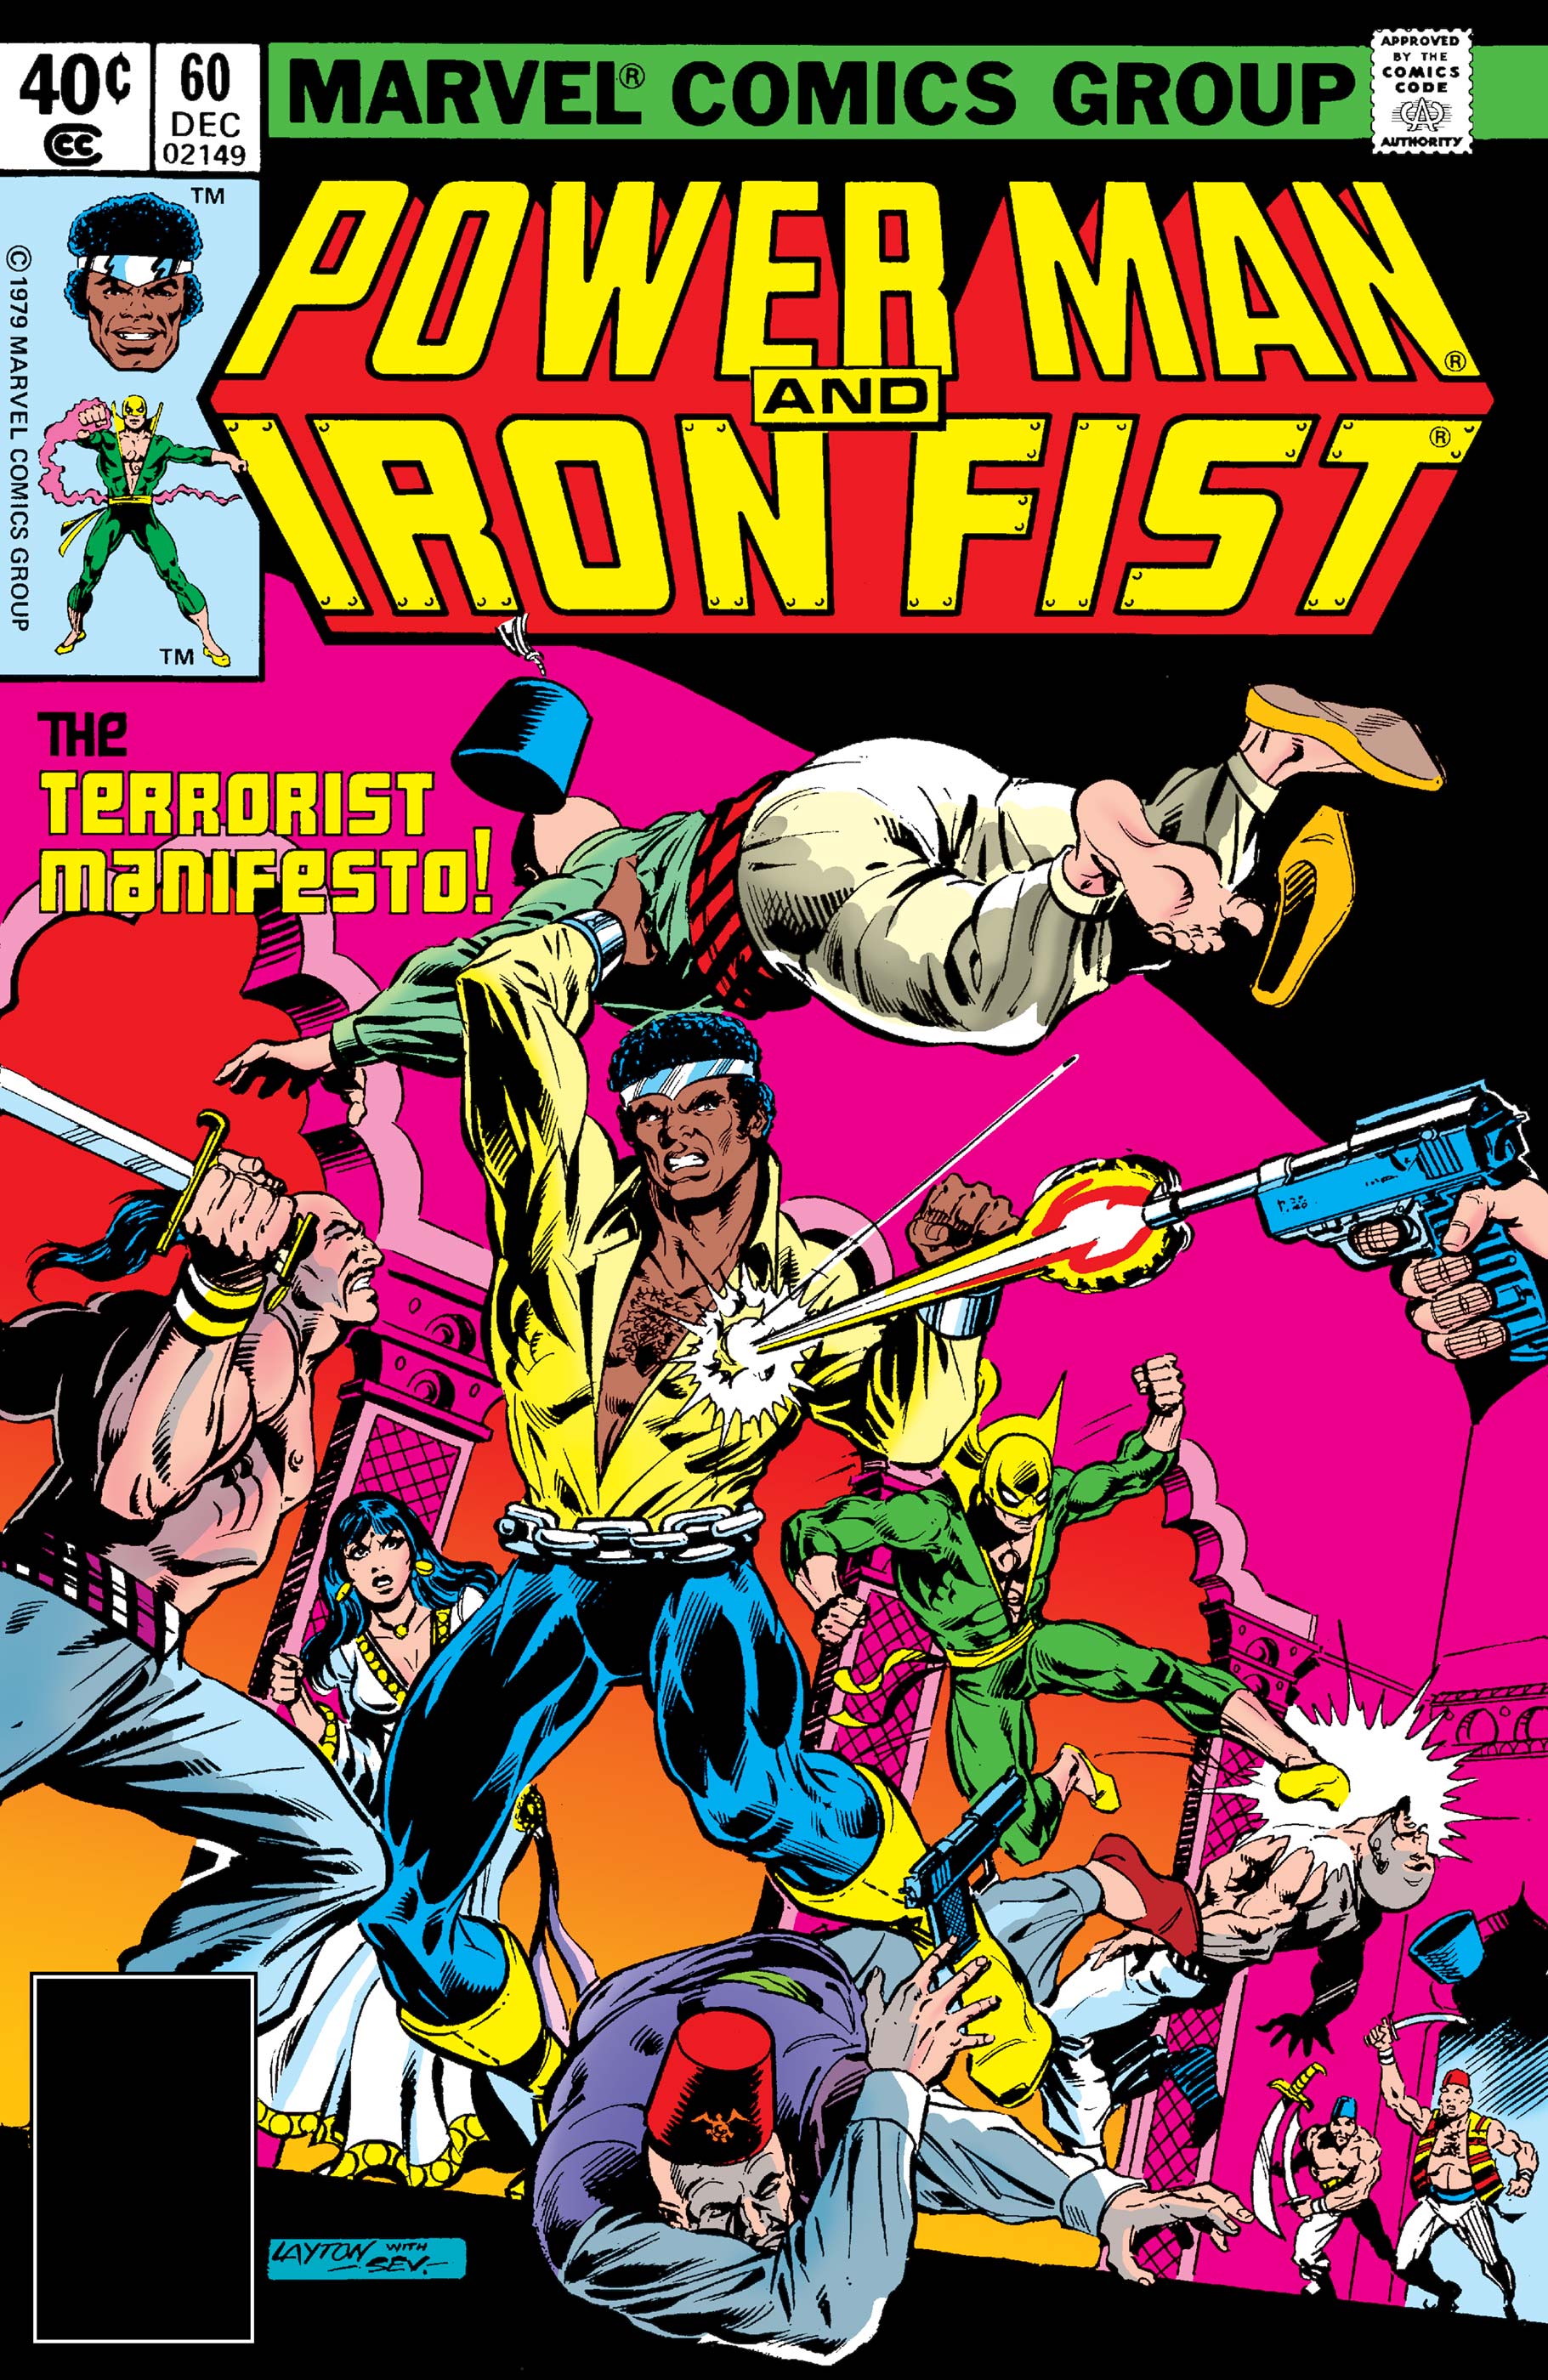 Power Man and Iron Fist (1978) #60